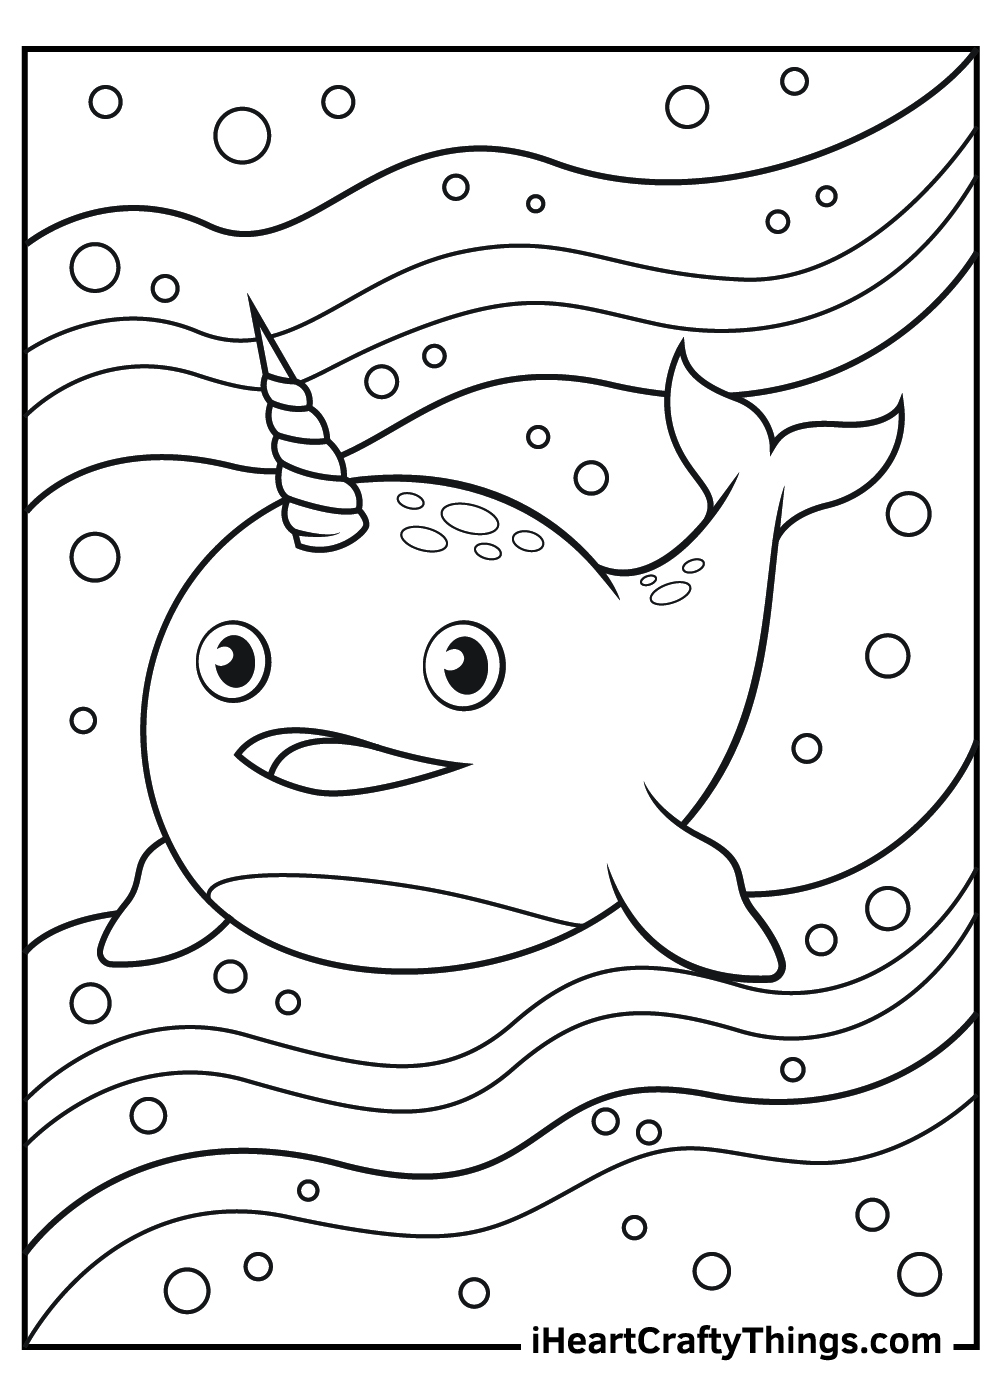 Narwhal Coloring Pages Updated 2021